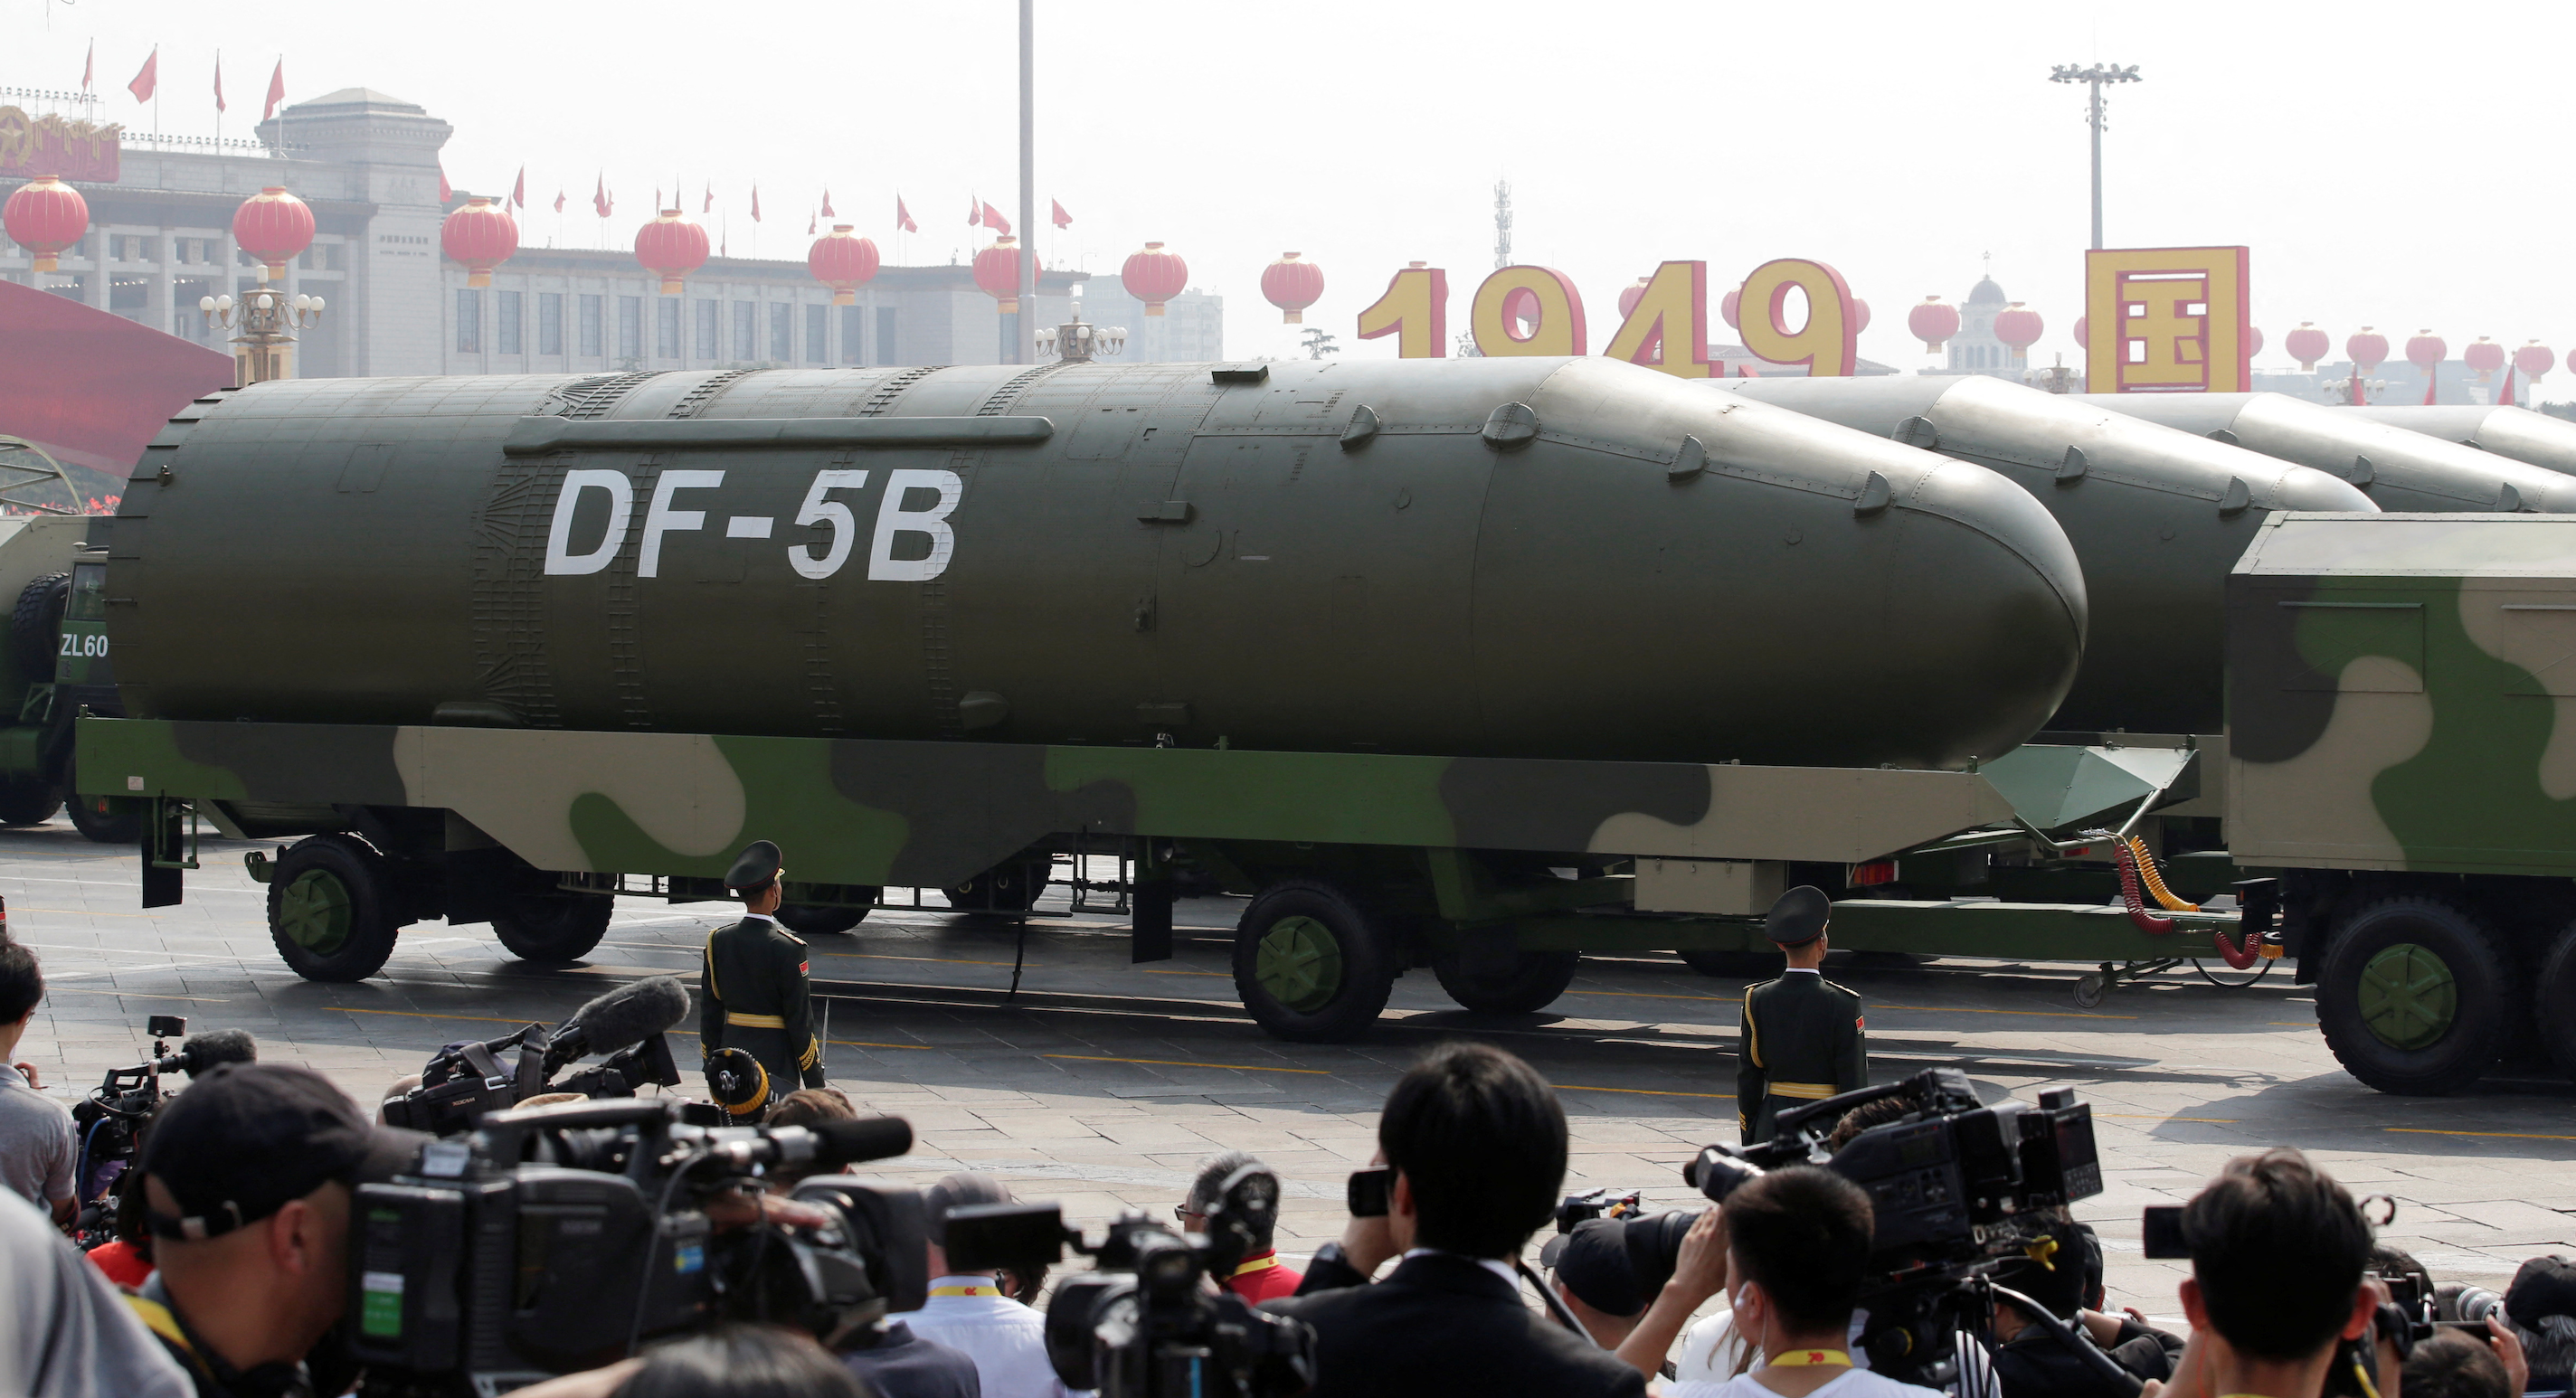 China now has over 500 nuclear warheads, Pentagon says